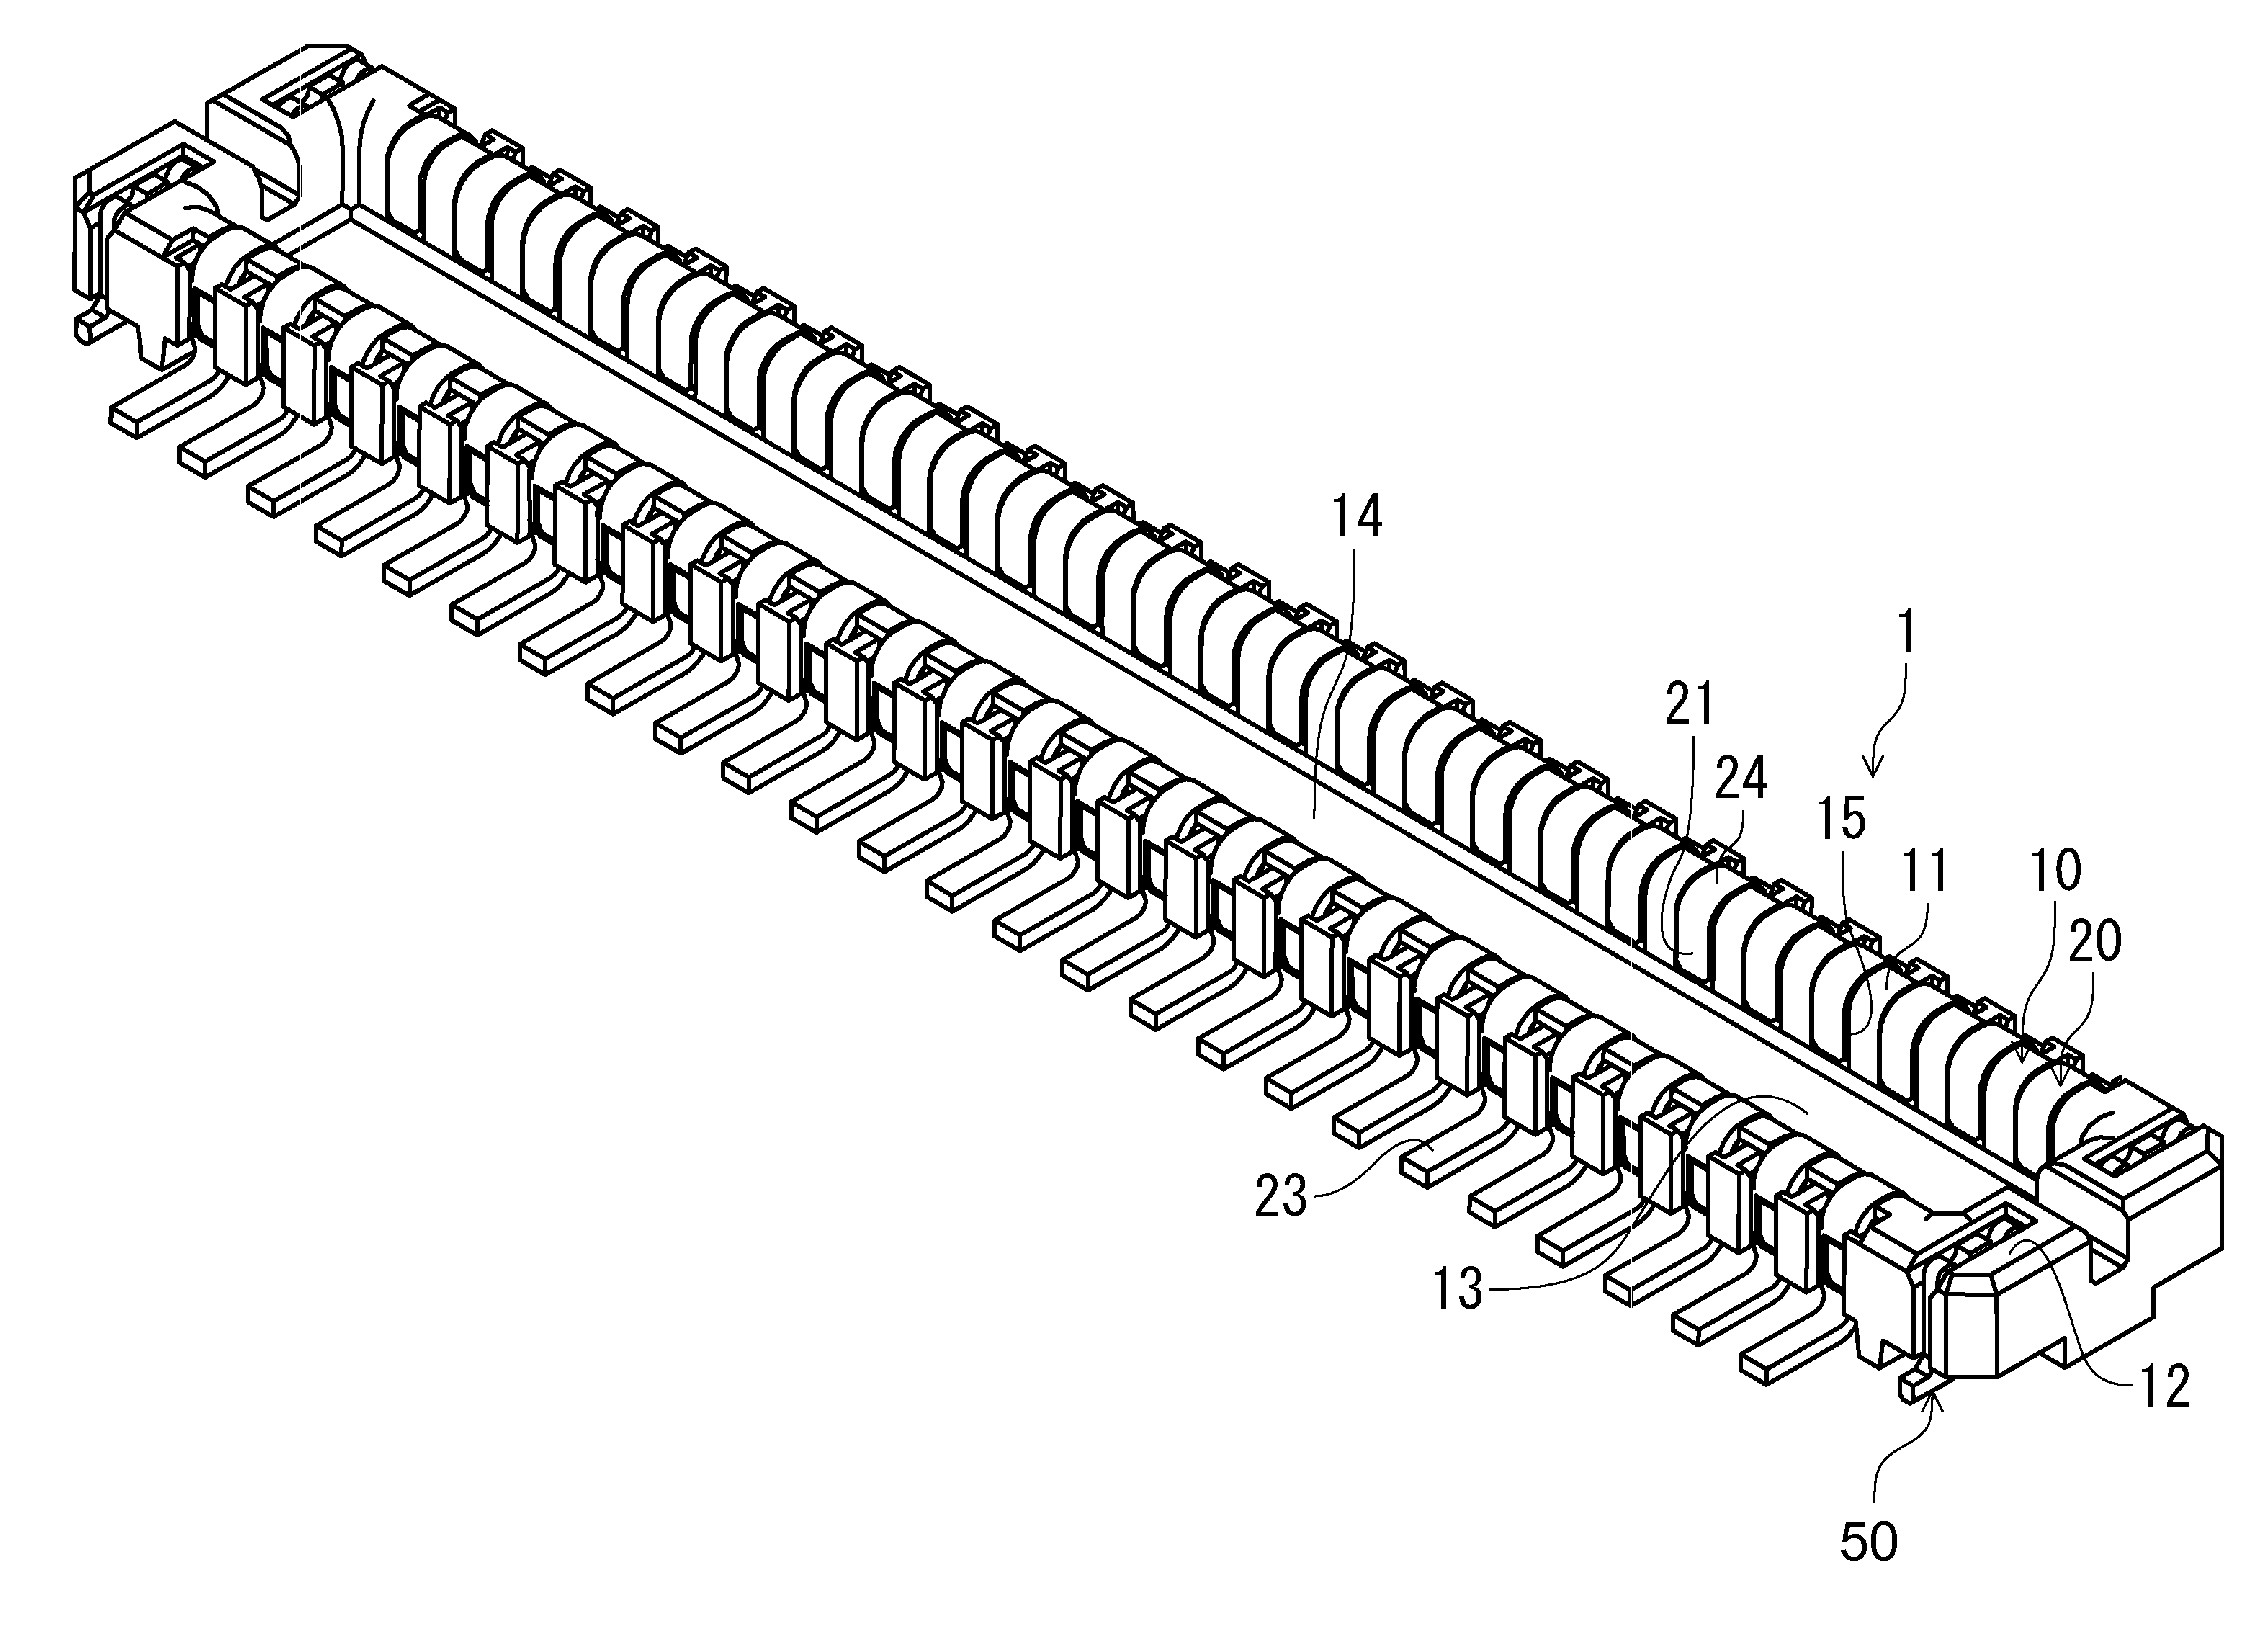 Electrical connector for circuit board